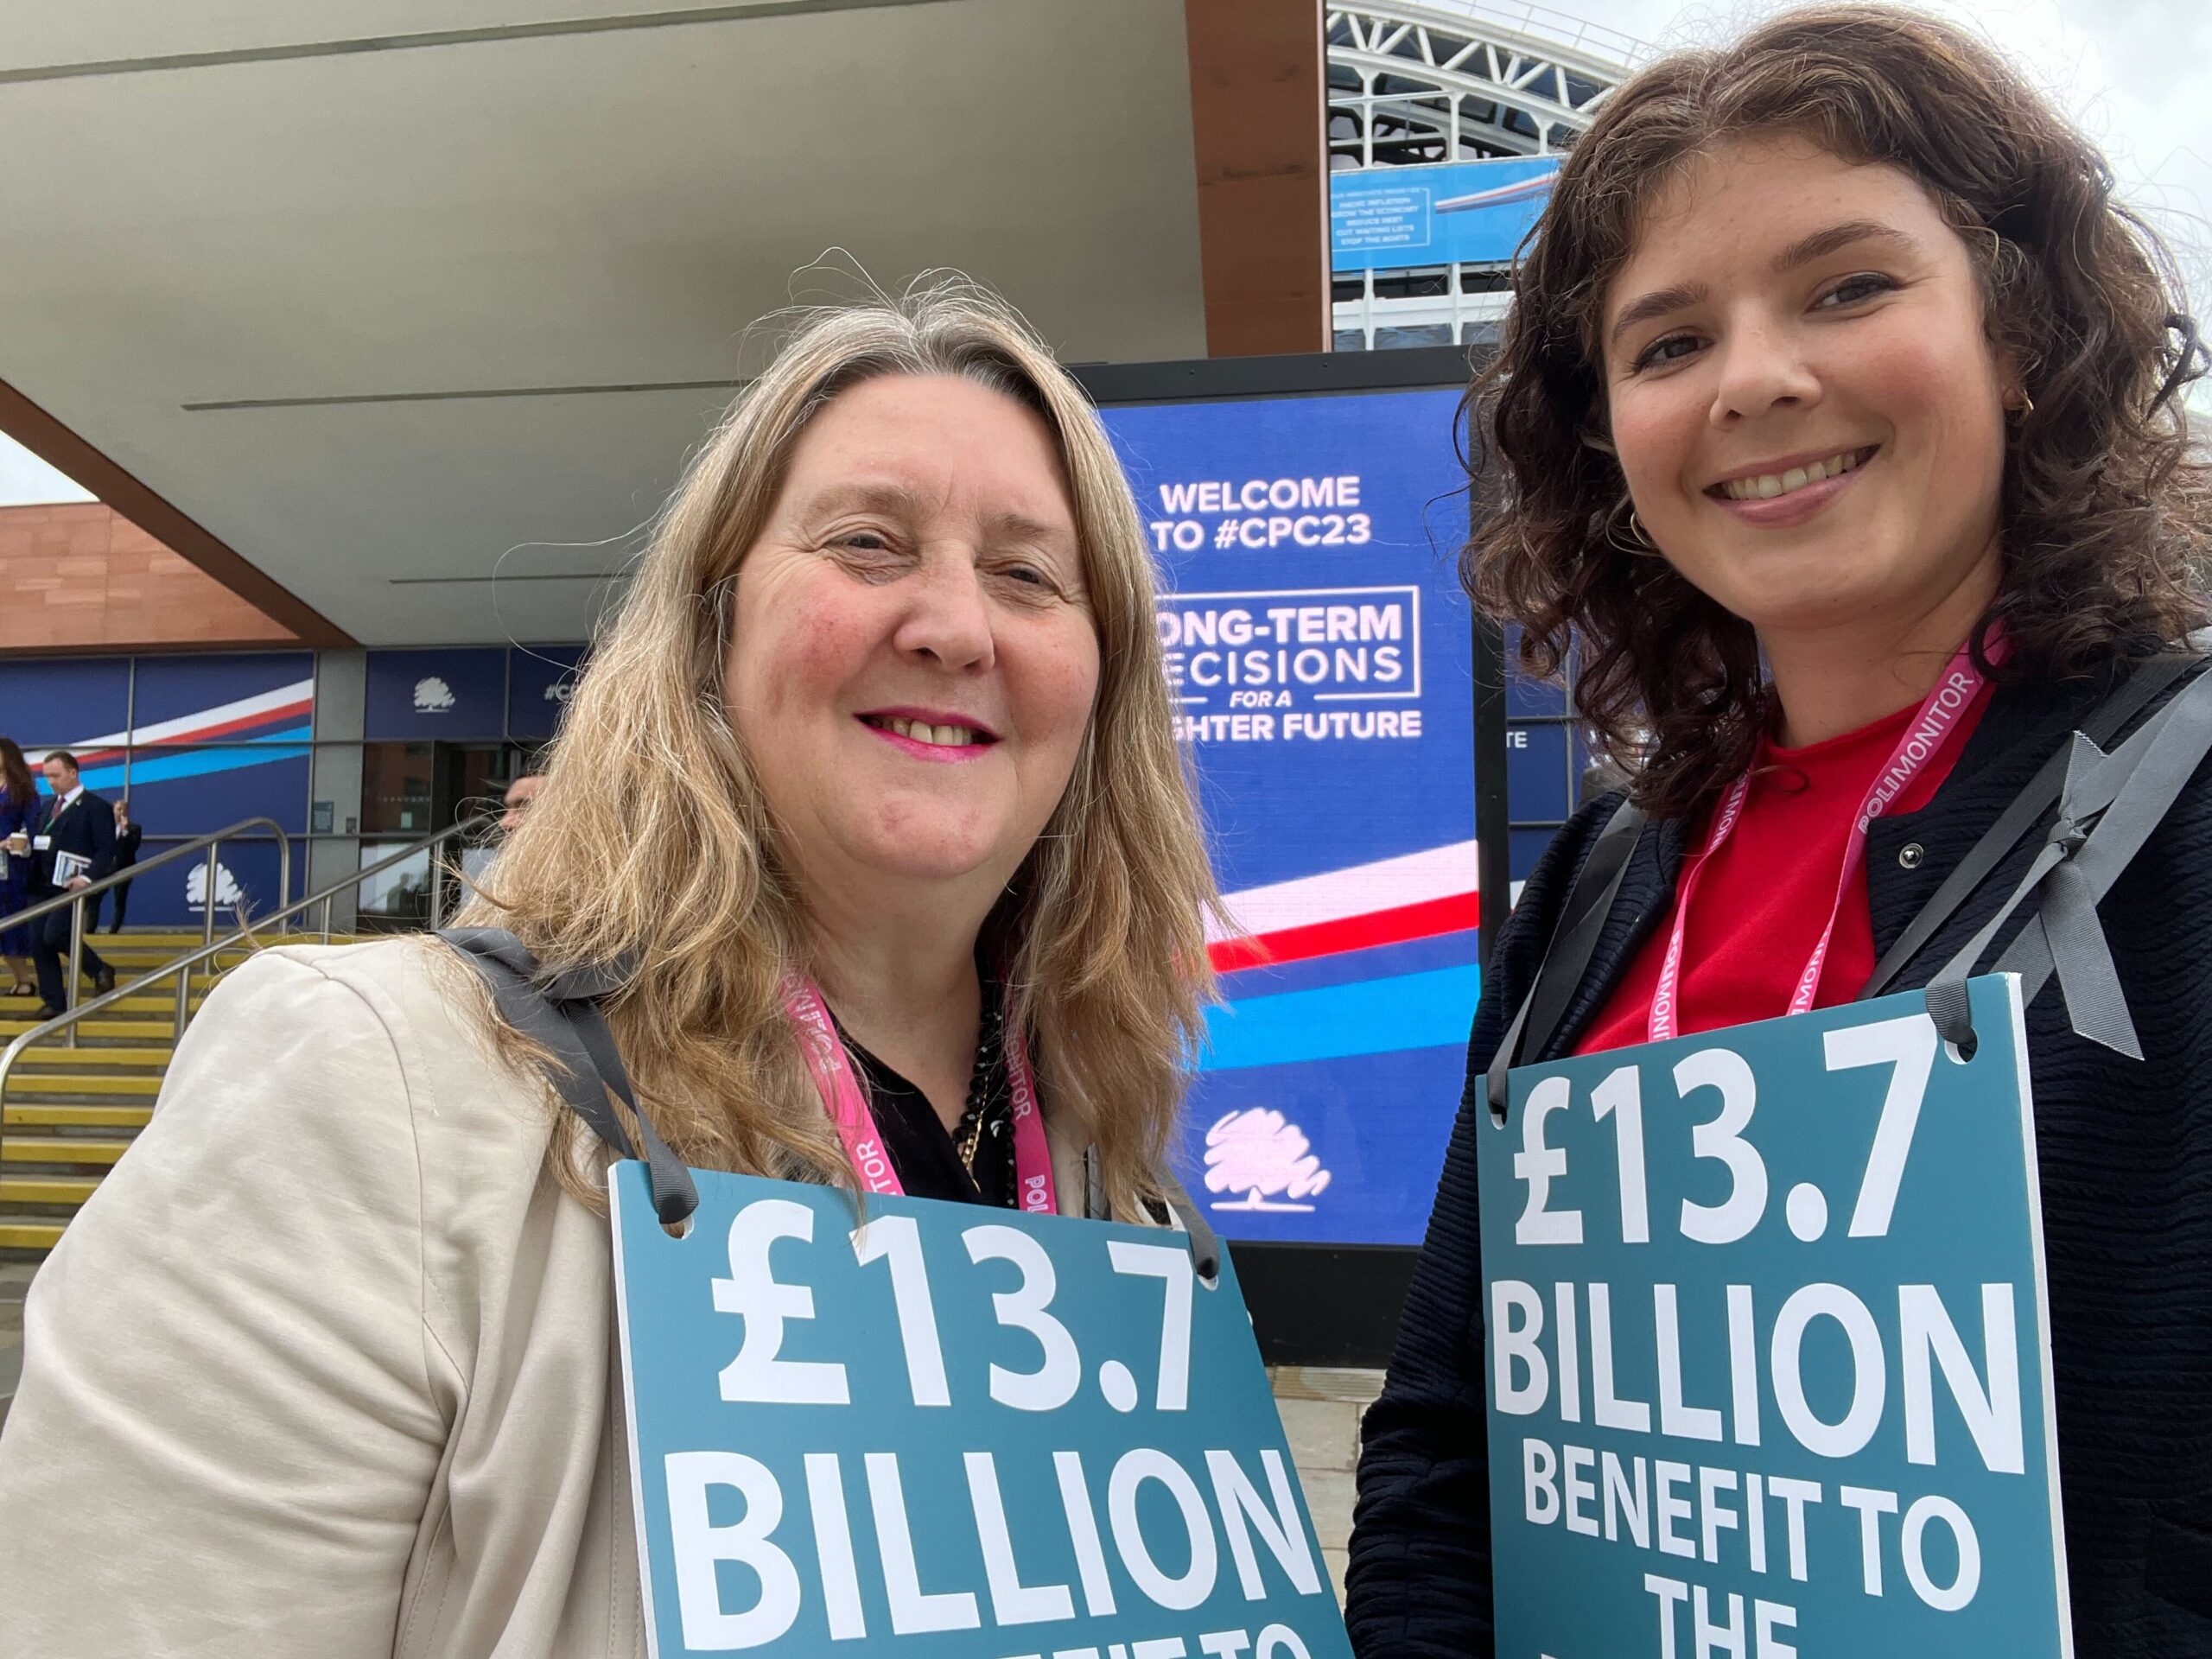 Helen Milner OBE, CEO of Good Things Foundation, and Natasha Bright-Wray, Associate Director of Communications, pictured at the Conservative Party Conference 2023.